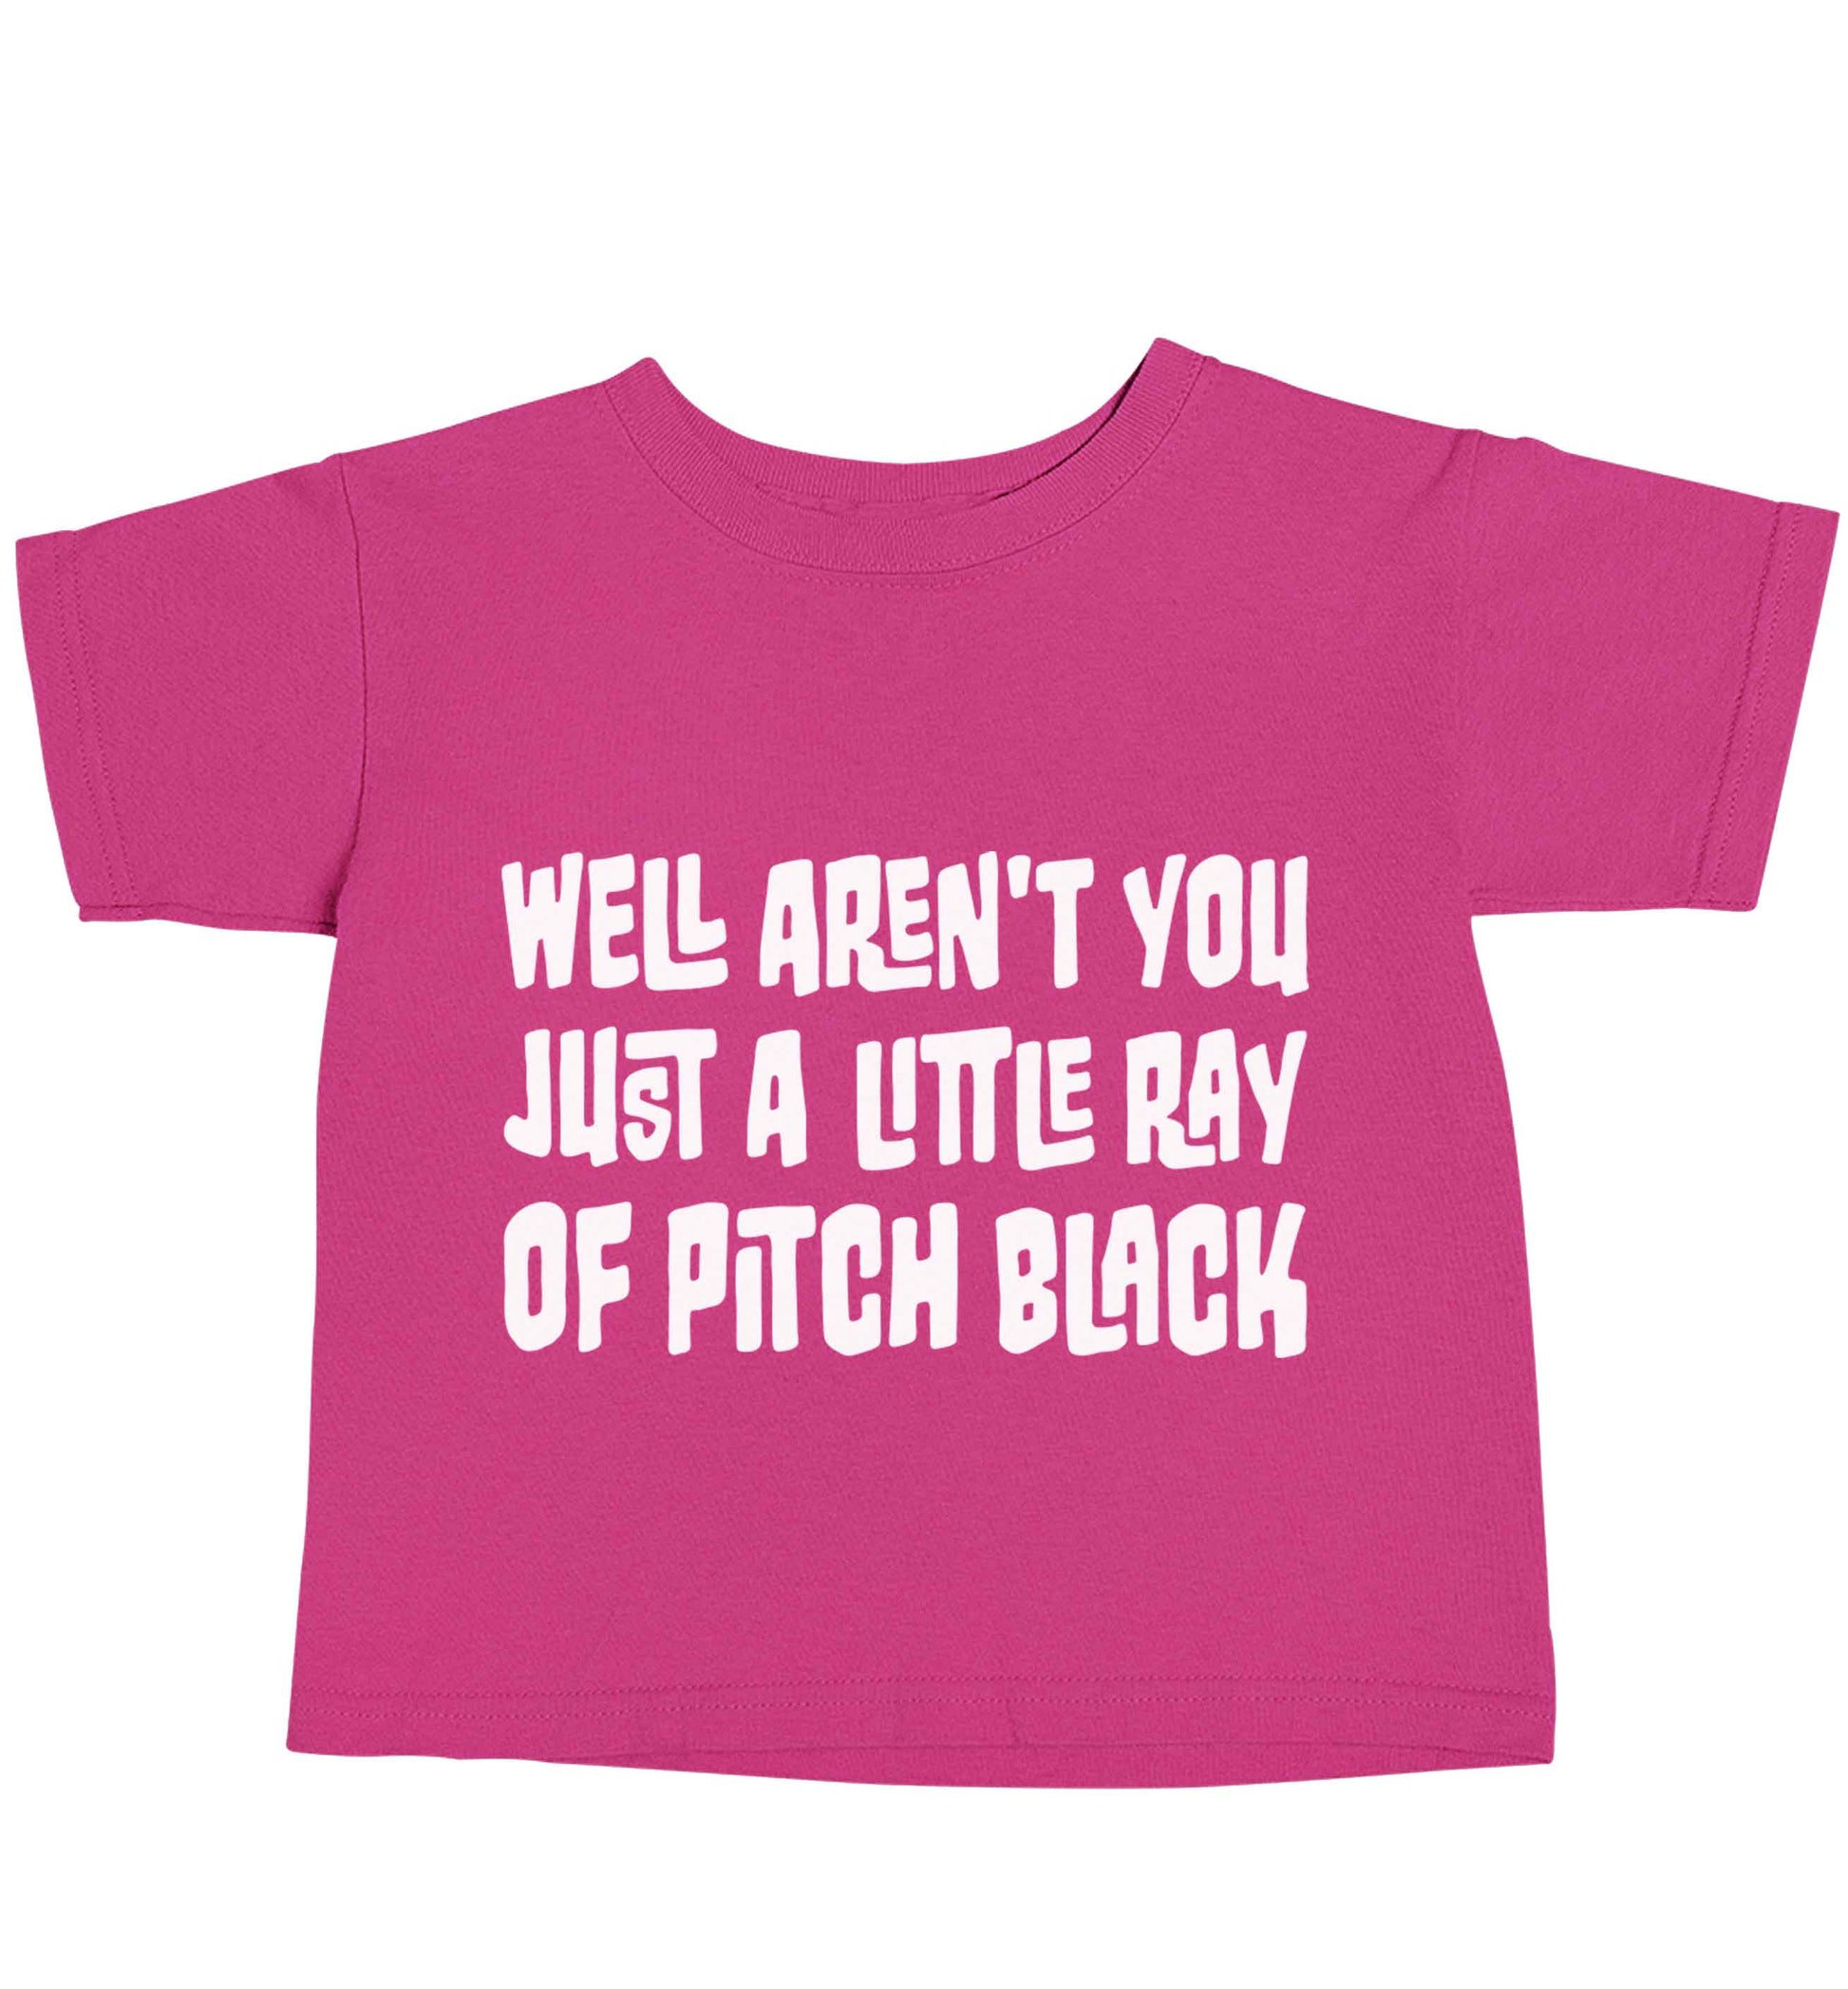 Well aren't you just a little ray of pitch black Kit pink baby toddler Tshirt 2 Years